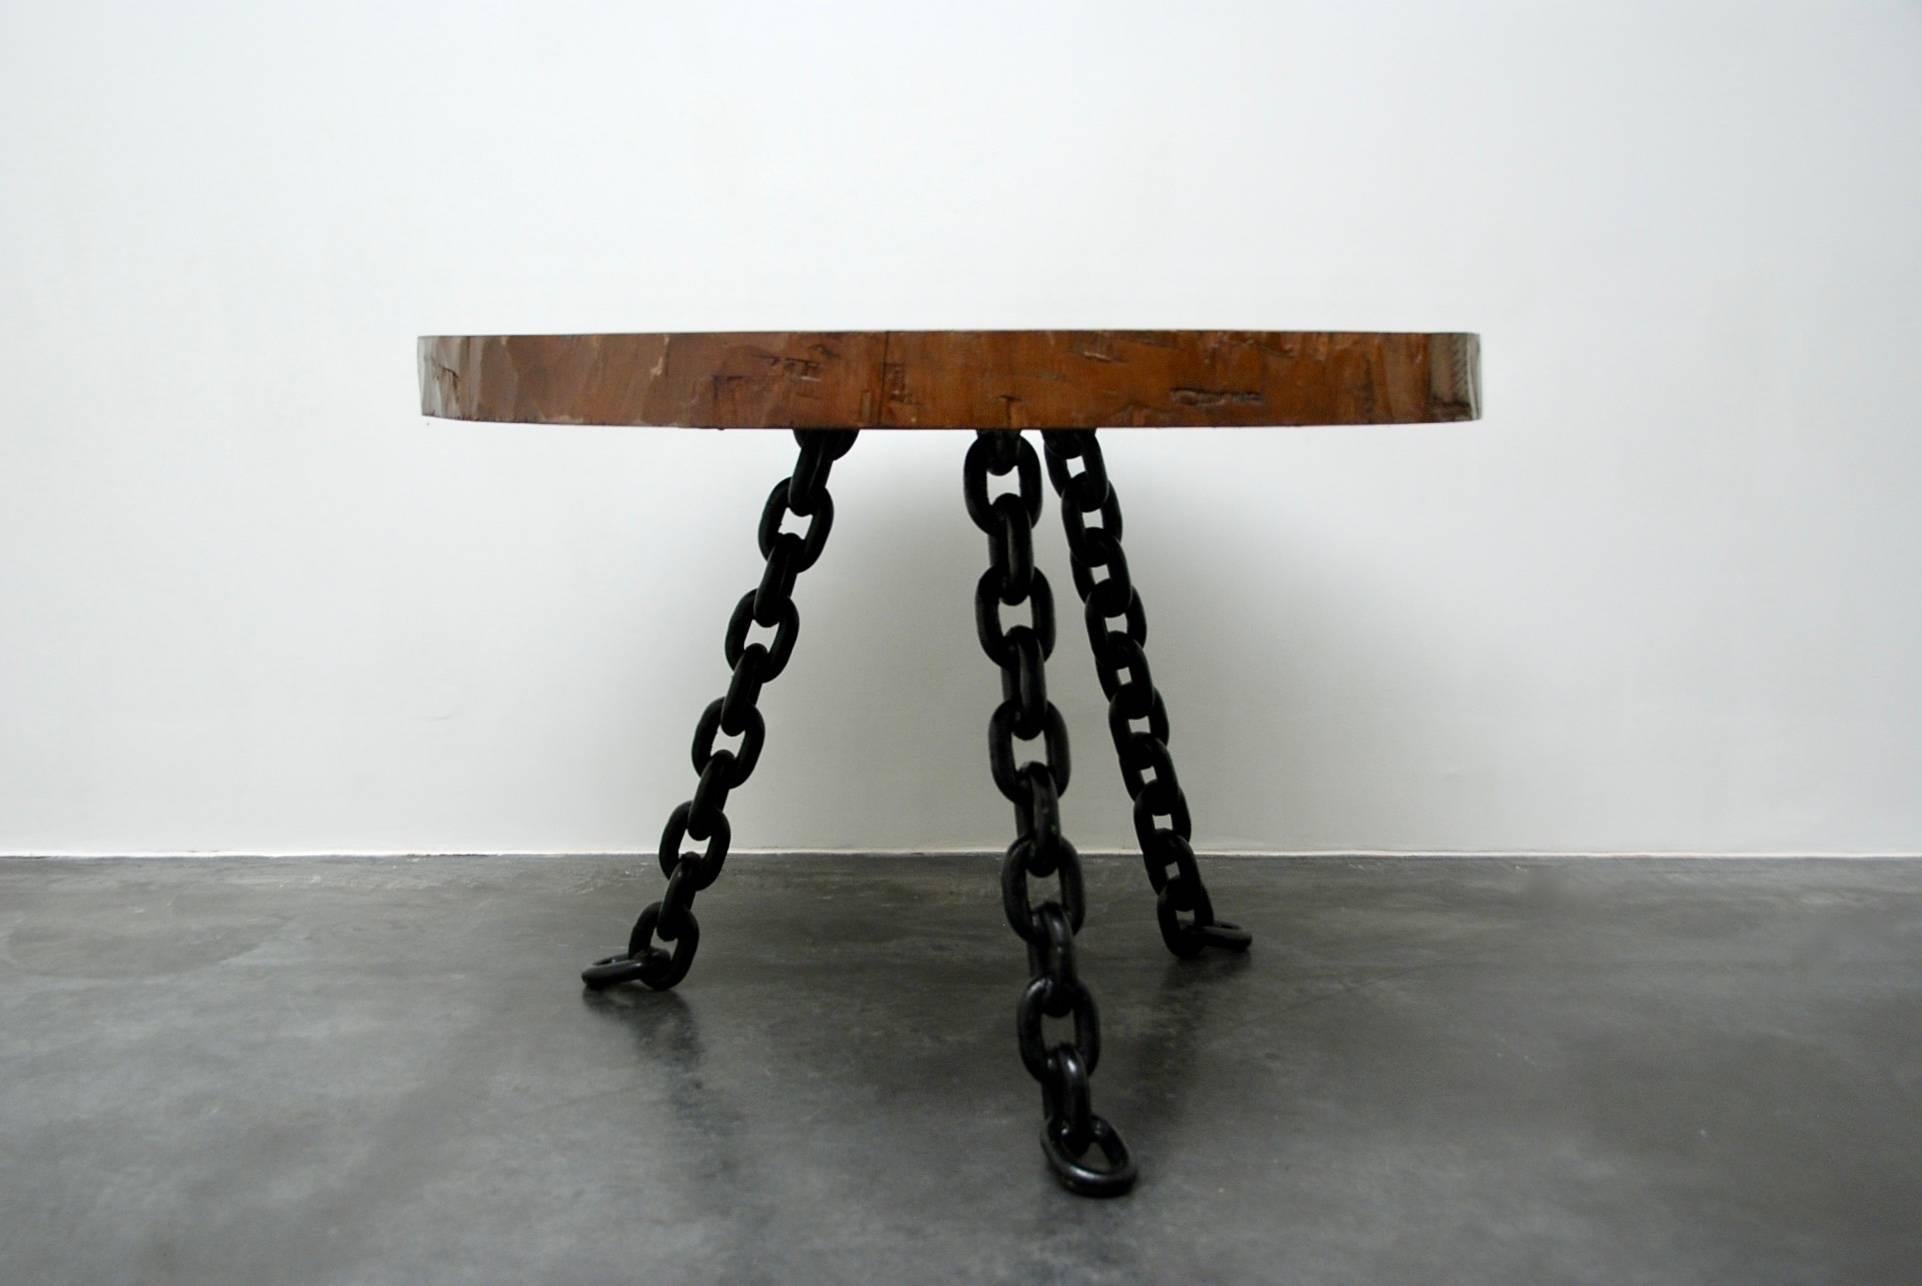 This impressive dining table can be dated in the 1940s or 1950s
The three legs are made of heavy black lacquered metal chains. The top is an amazing slice of tree trunk. It is an old dining table in very good original condition, this extraordinary